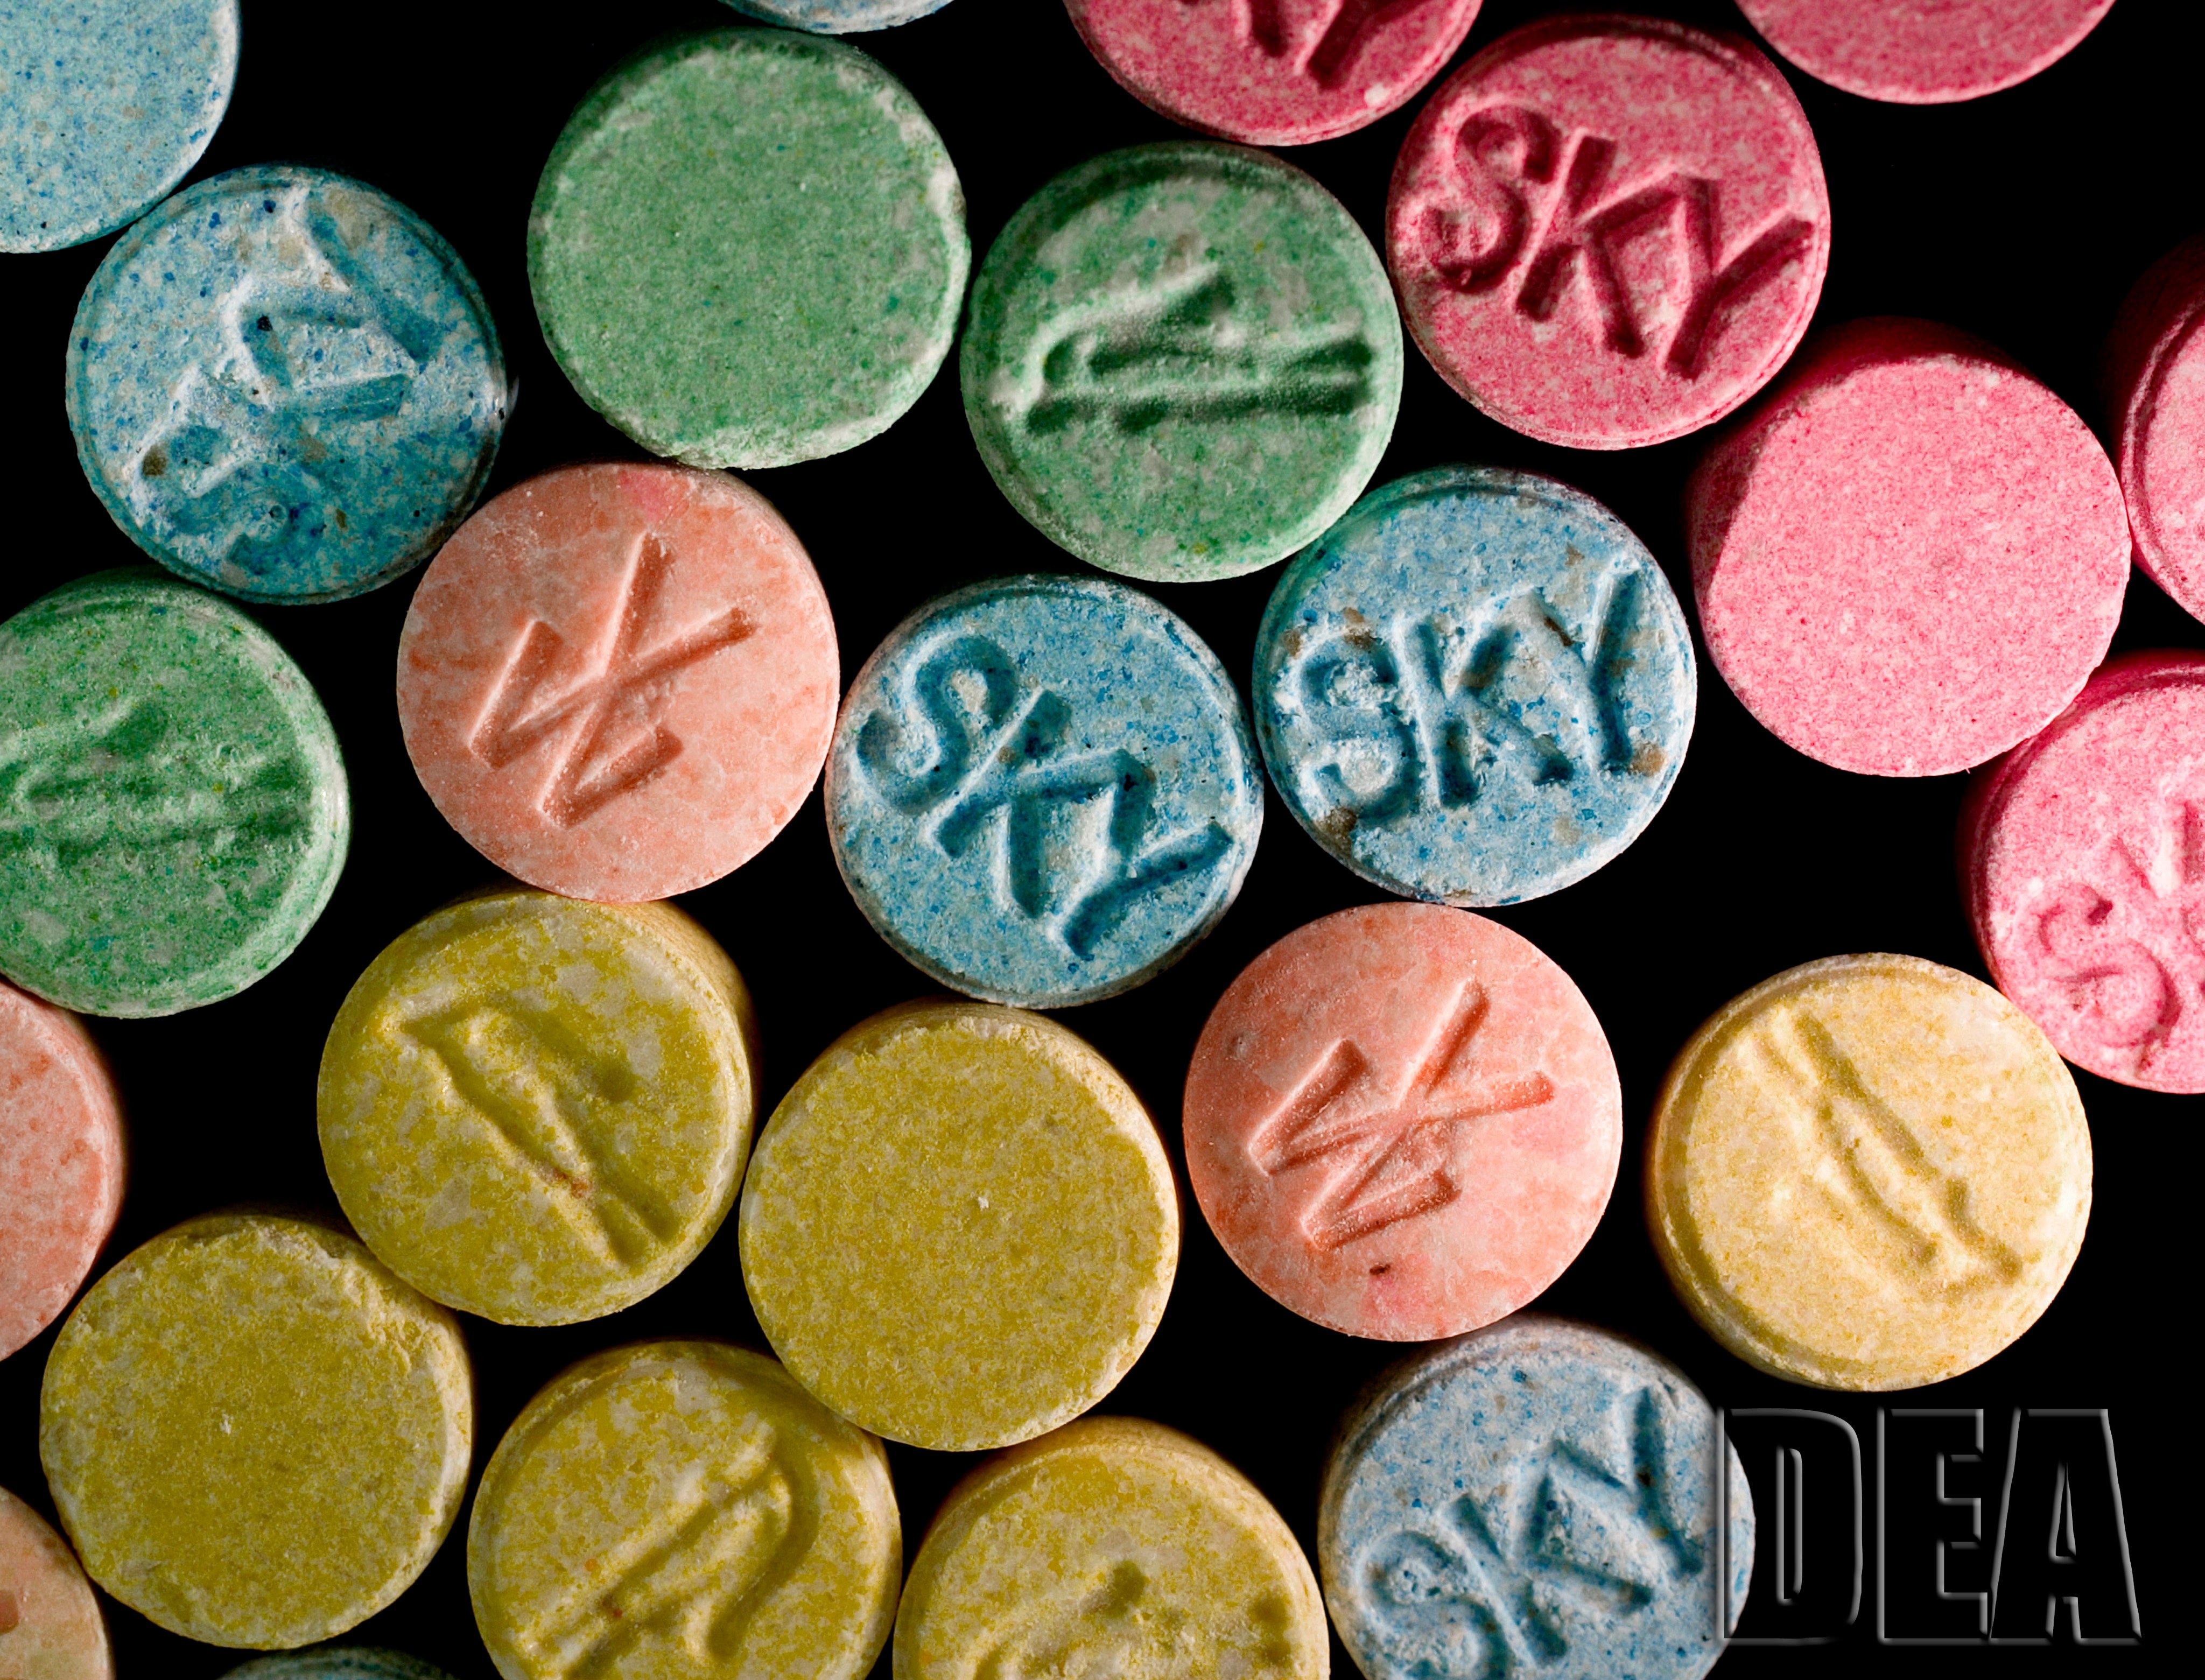 WA study challenges myth that pill testing at festivals leads to more drug taking